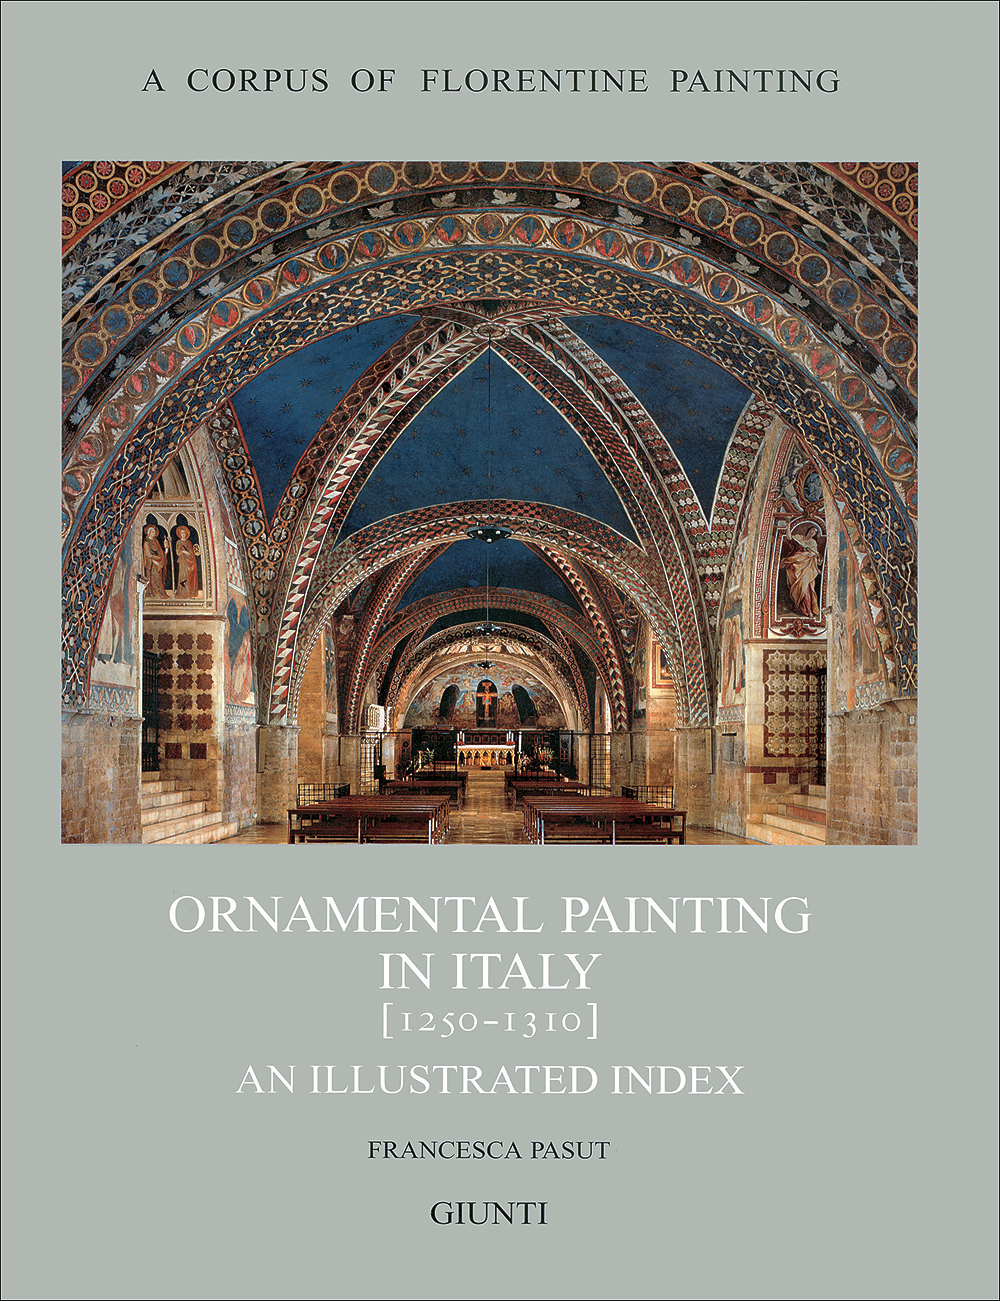 Ornamental painting in Italy (1250-1310)